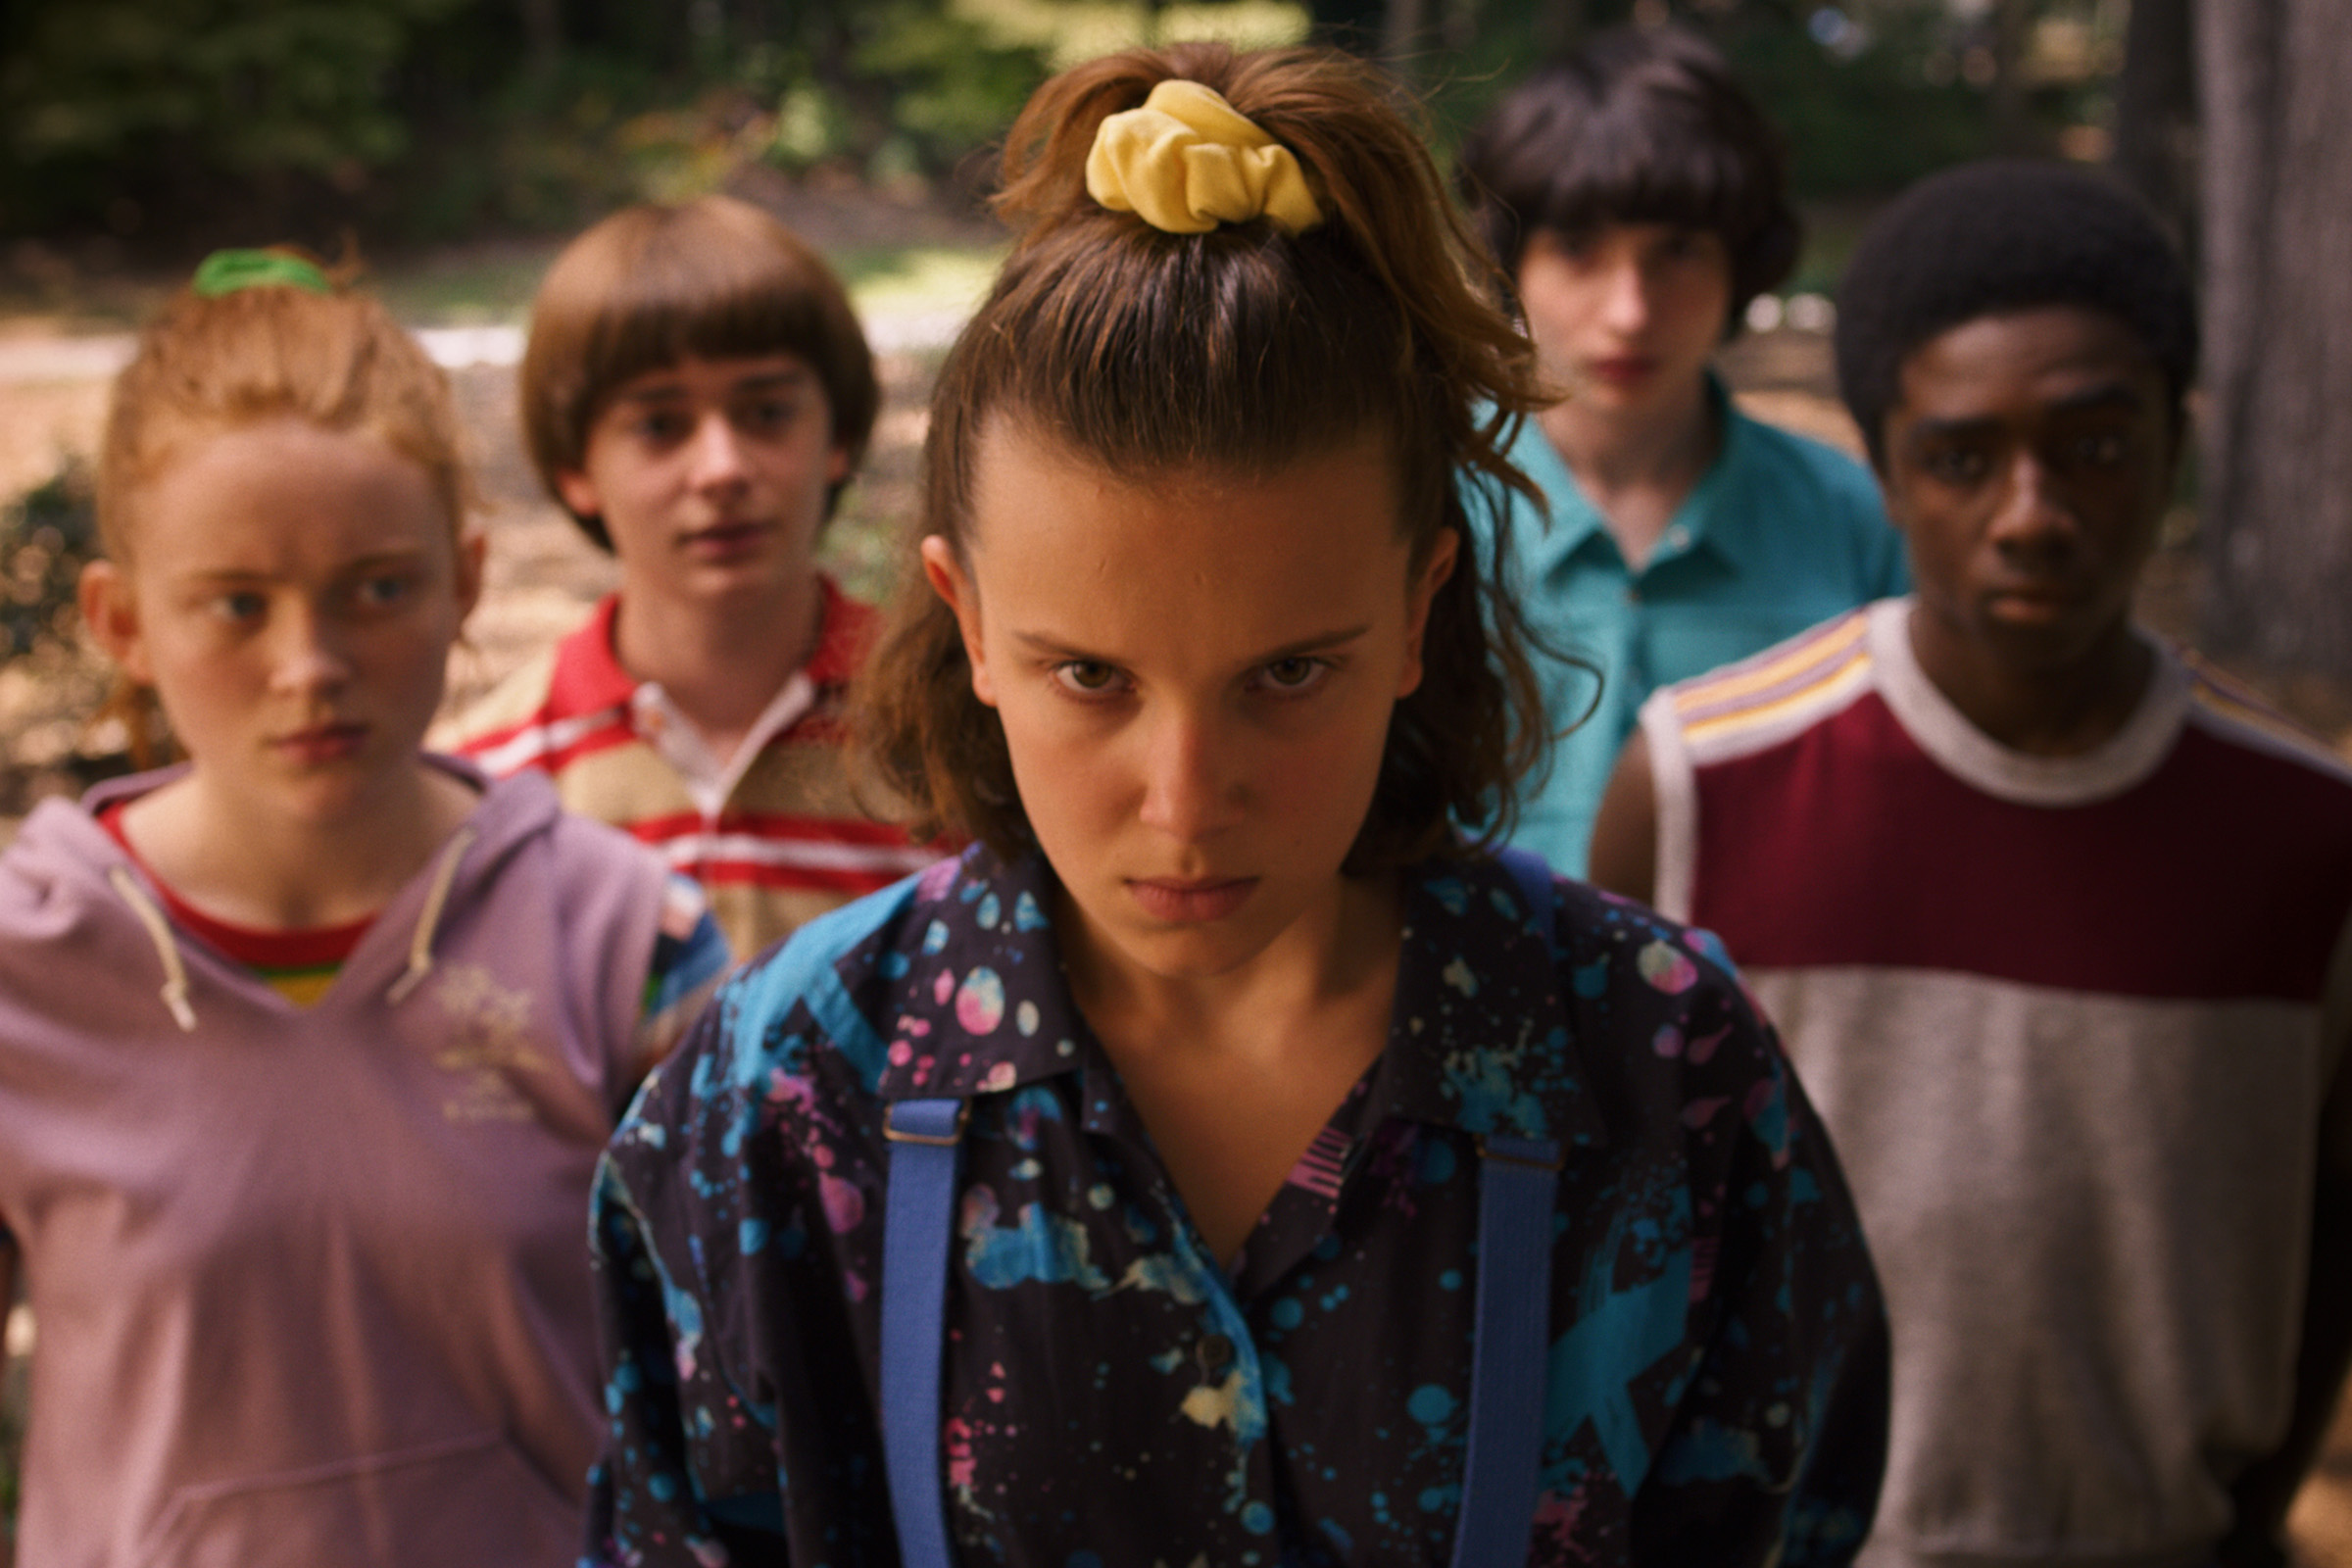 Major Questions About Stranger Things 3